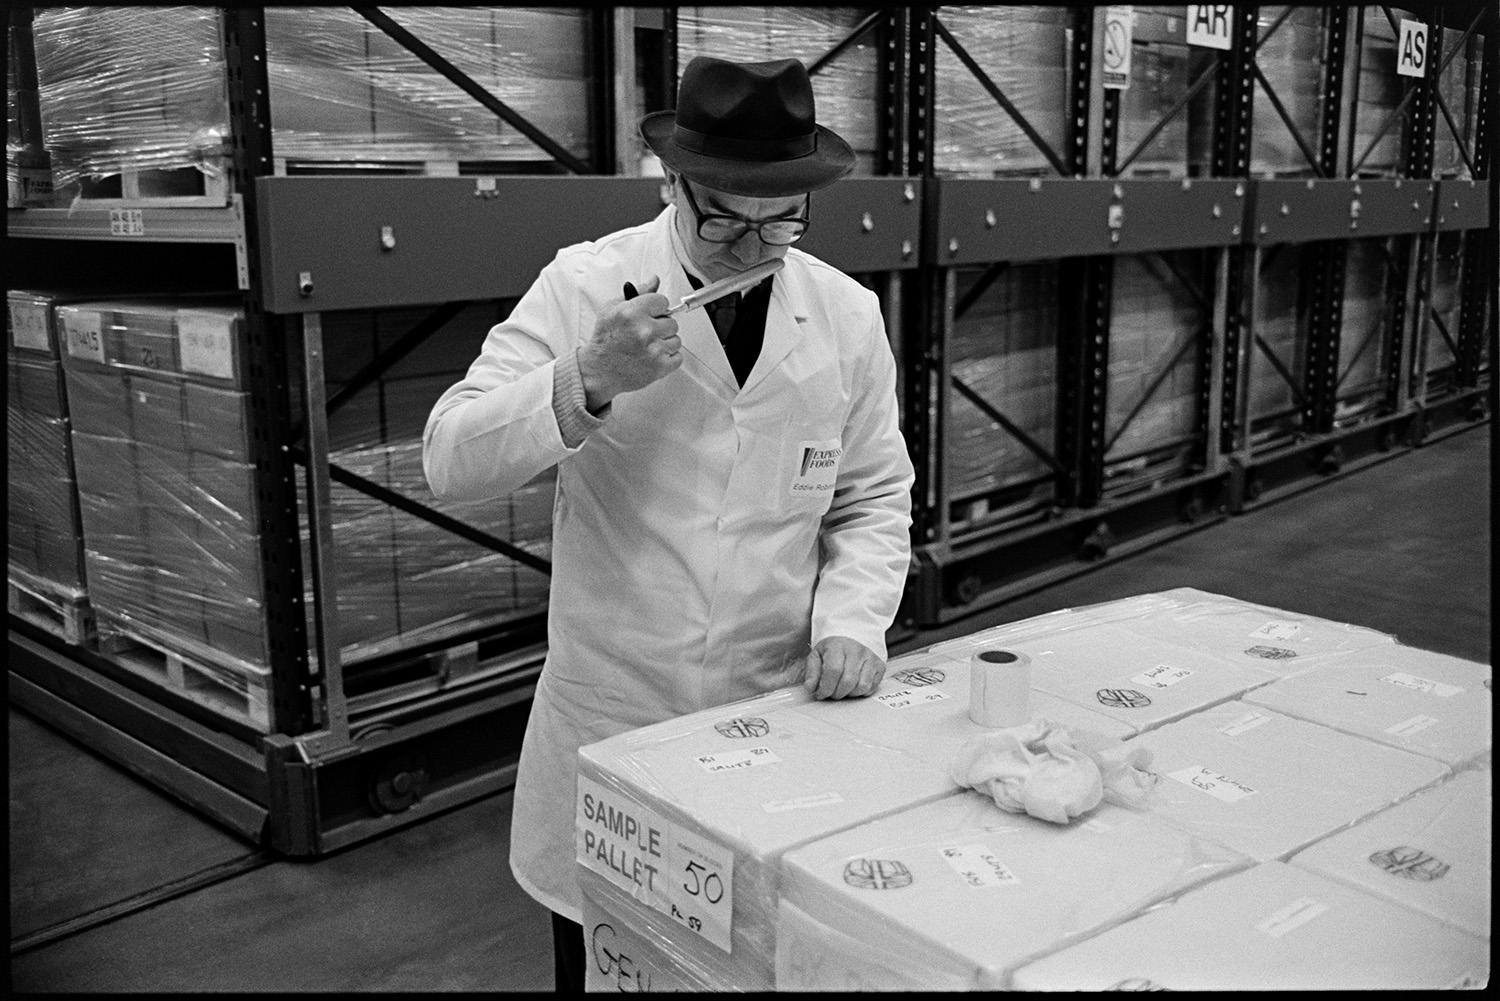 Interior of cheese factory men testing cheese and packing. 
[A man sniffing cheese from a sample pallet at the Dairy Crest North Tawton Cheese Factory. Boxes of cheese can be seen stacked in the background.]